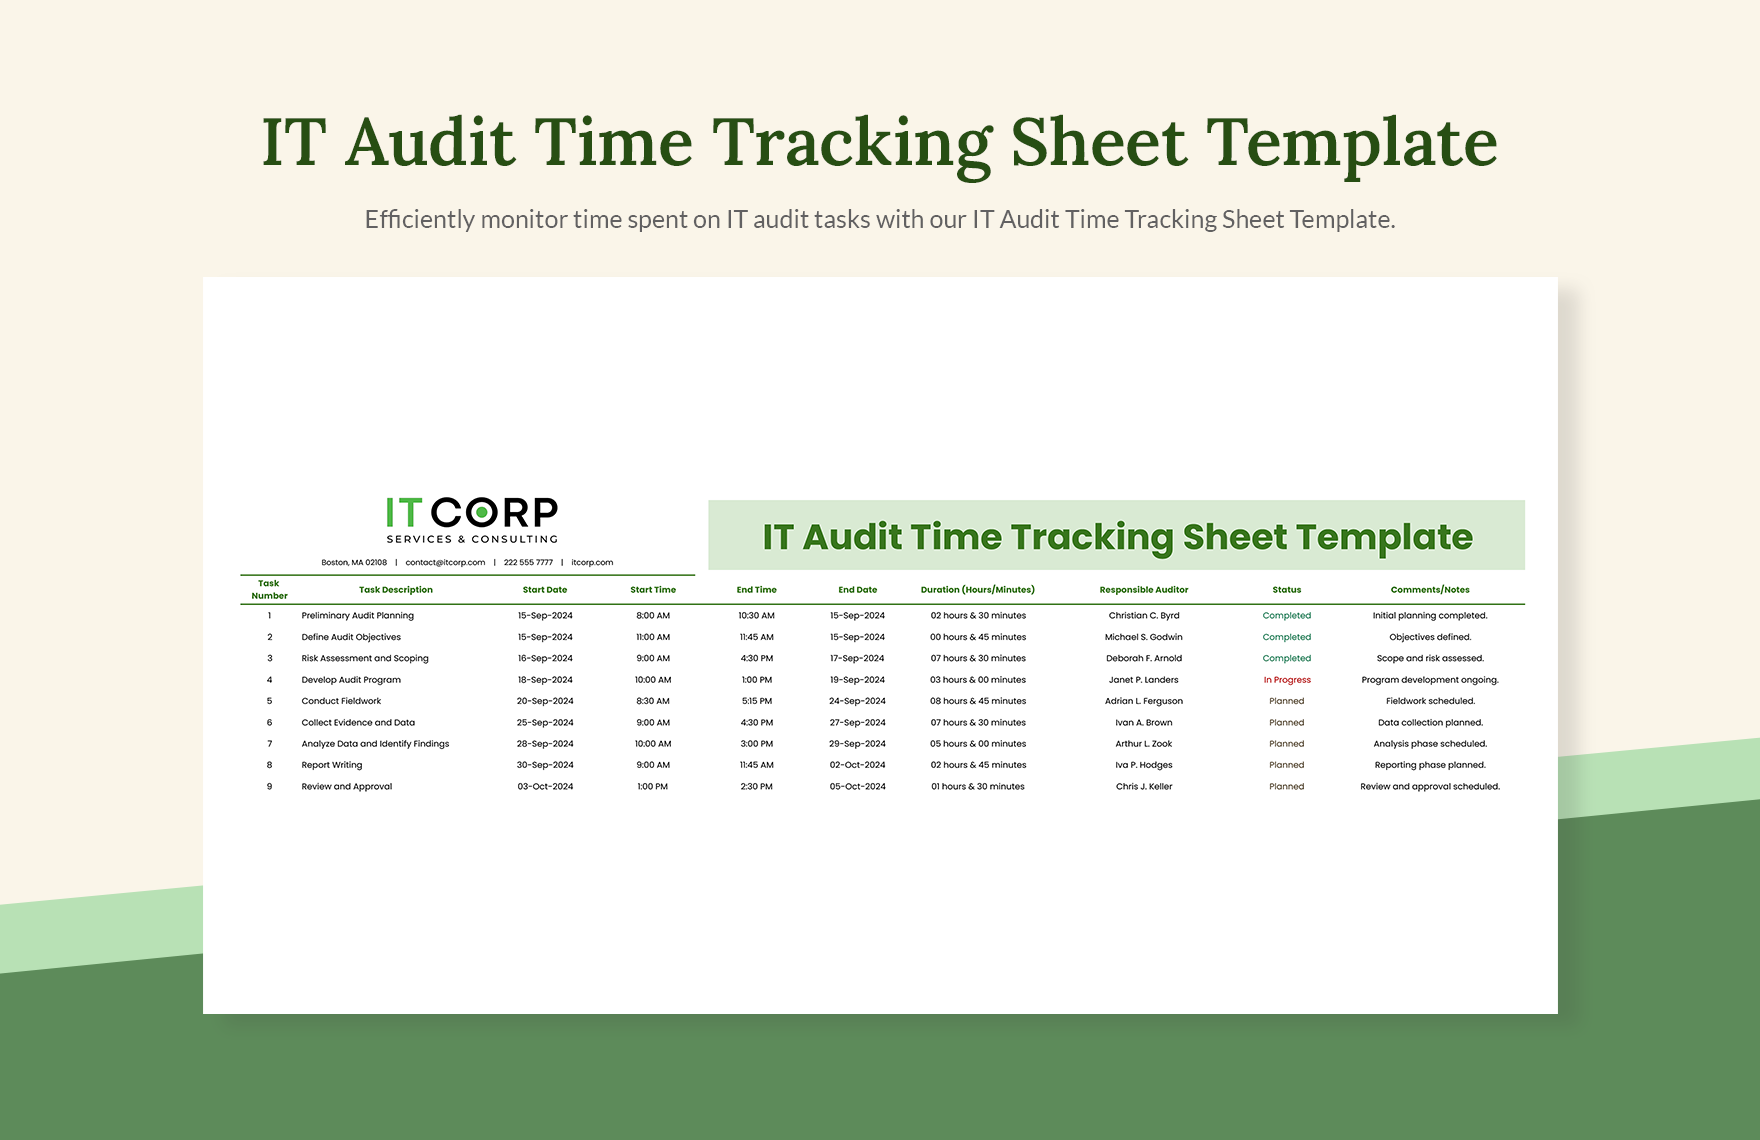 IT Audit Time Tracking Sheet Template